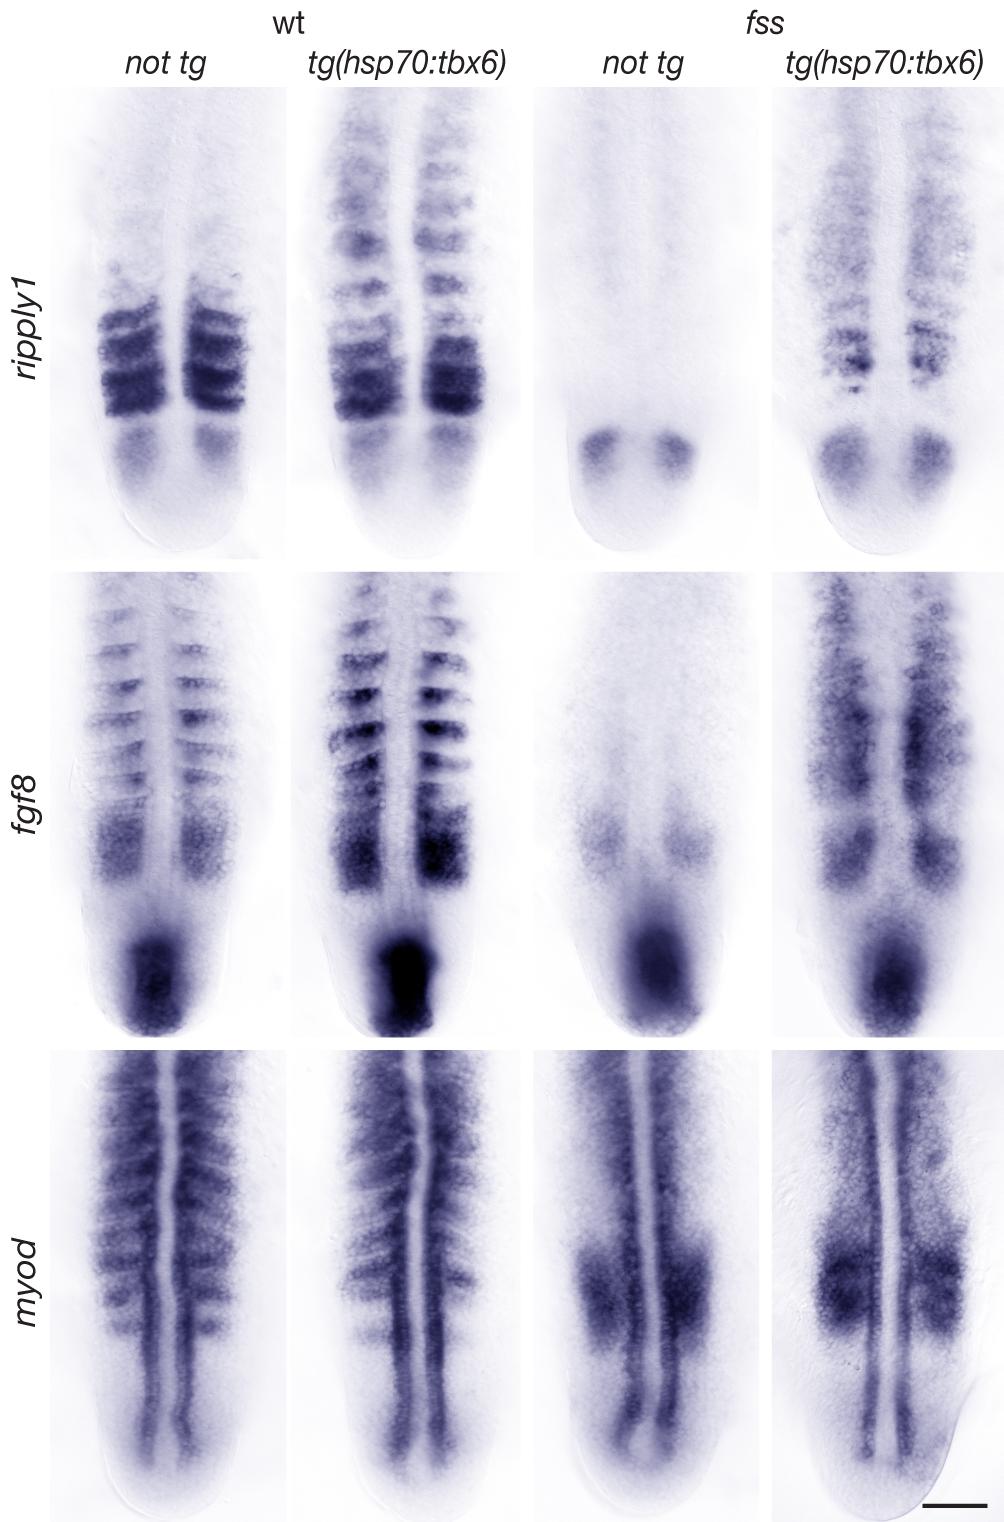 Figure 5. A pulse of Tbx6 expression in fss/tbx6 mutants induces segmental expression of ripply1 and fgf8, and locally represses myod.